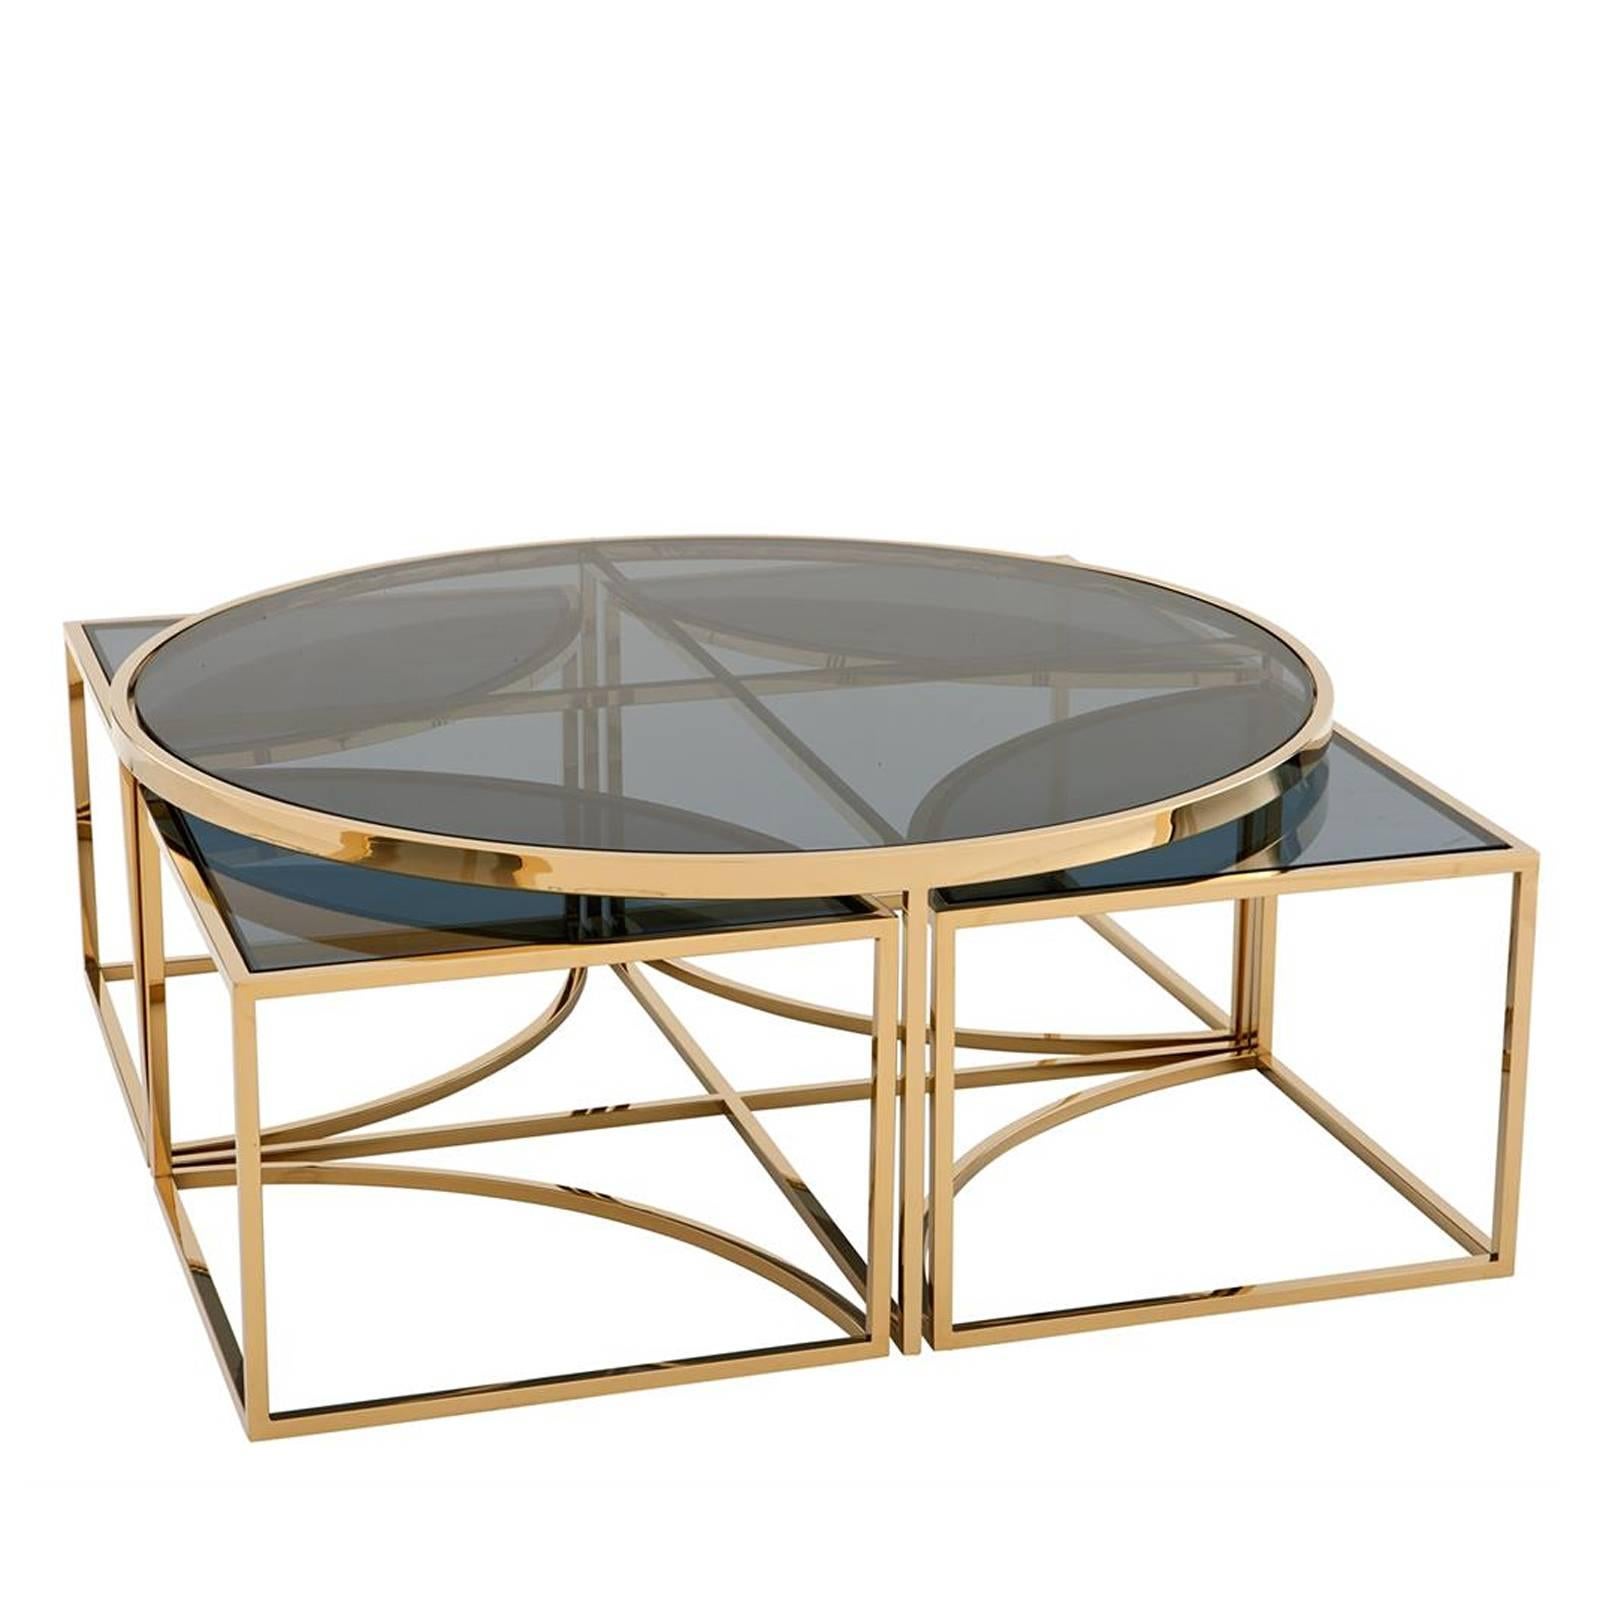 Coffee table four pieces with gold finish structure
and smoked glass top. One side table included four small
side tables. Also available in polished stainless steel
and smoked glass top.
